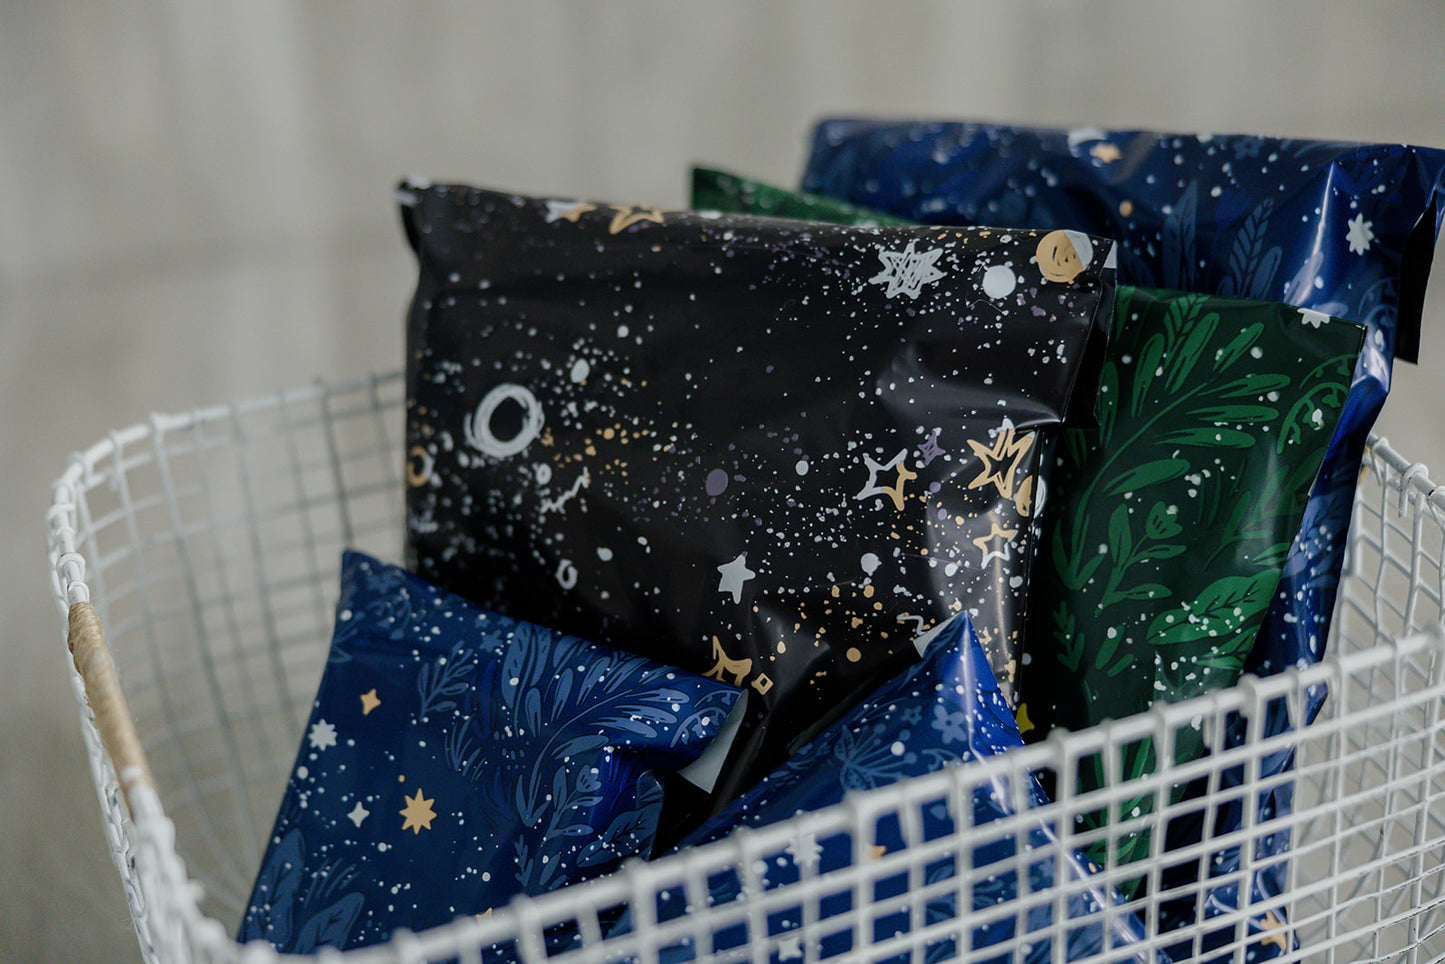 A basket full of Midnight Galaxy Mailers 10" x 13" by impack.co recyclable coffee bags.